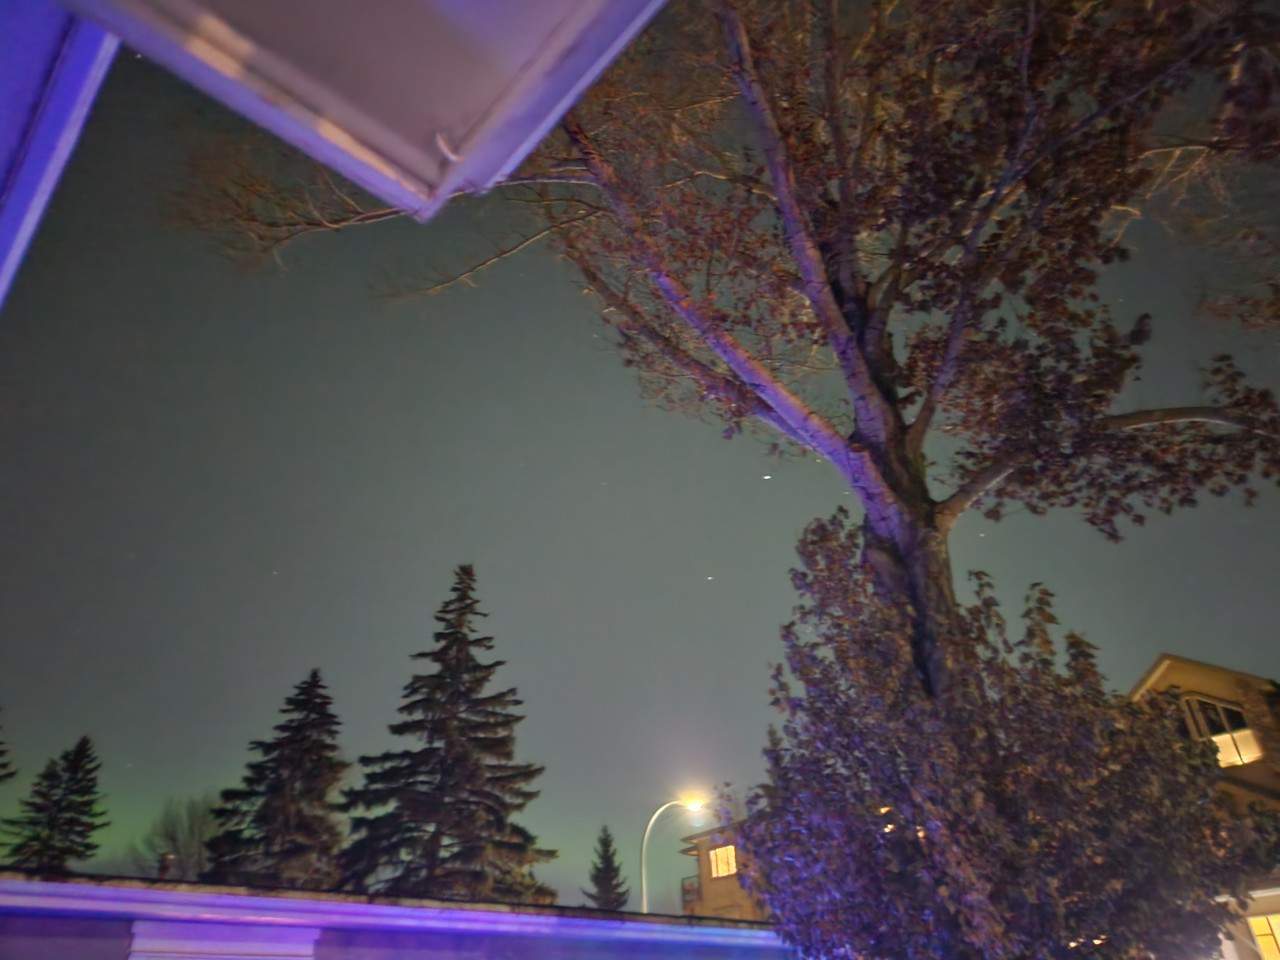 Northern Lights Starting in Calgary Alberta Canada  - I was sitting on my porch and noticed the sky had a slight glow to it. I flicked night mode on my camera and snapped a quick picture to see if what I seeing was really the Northern Lights. As you can see over my neighbours house, there is a definite green haze happening. That's when I sent a text to someone I know is out of the city and asked if they could see them. Yup! Start the car! Lady Aurora is awake!